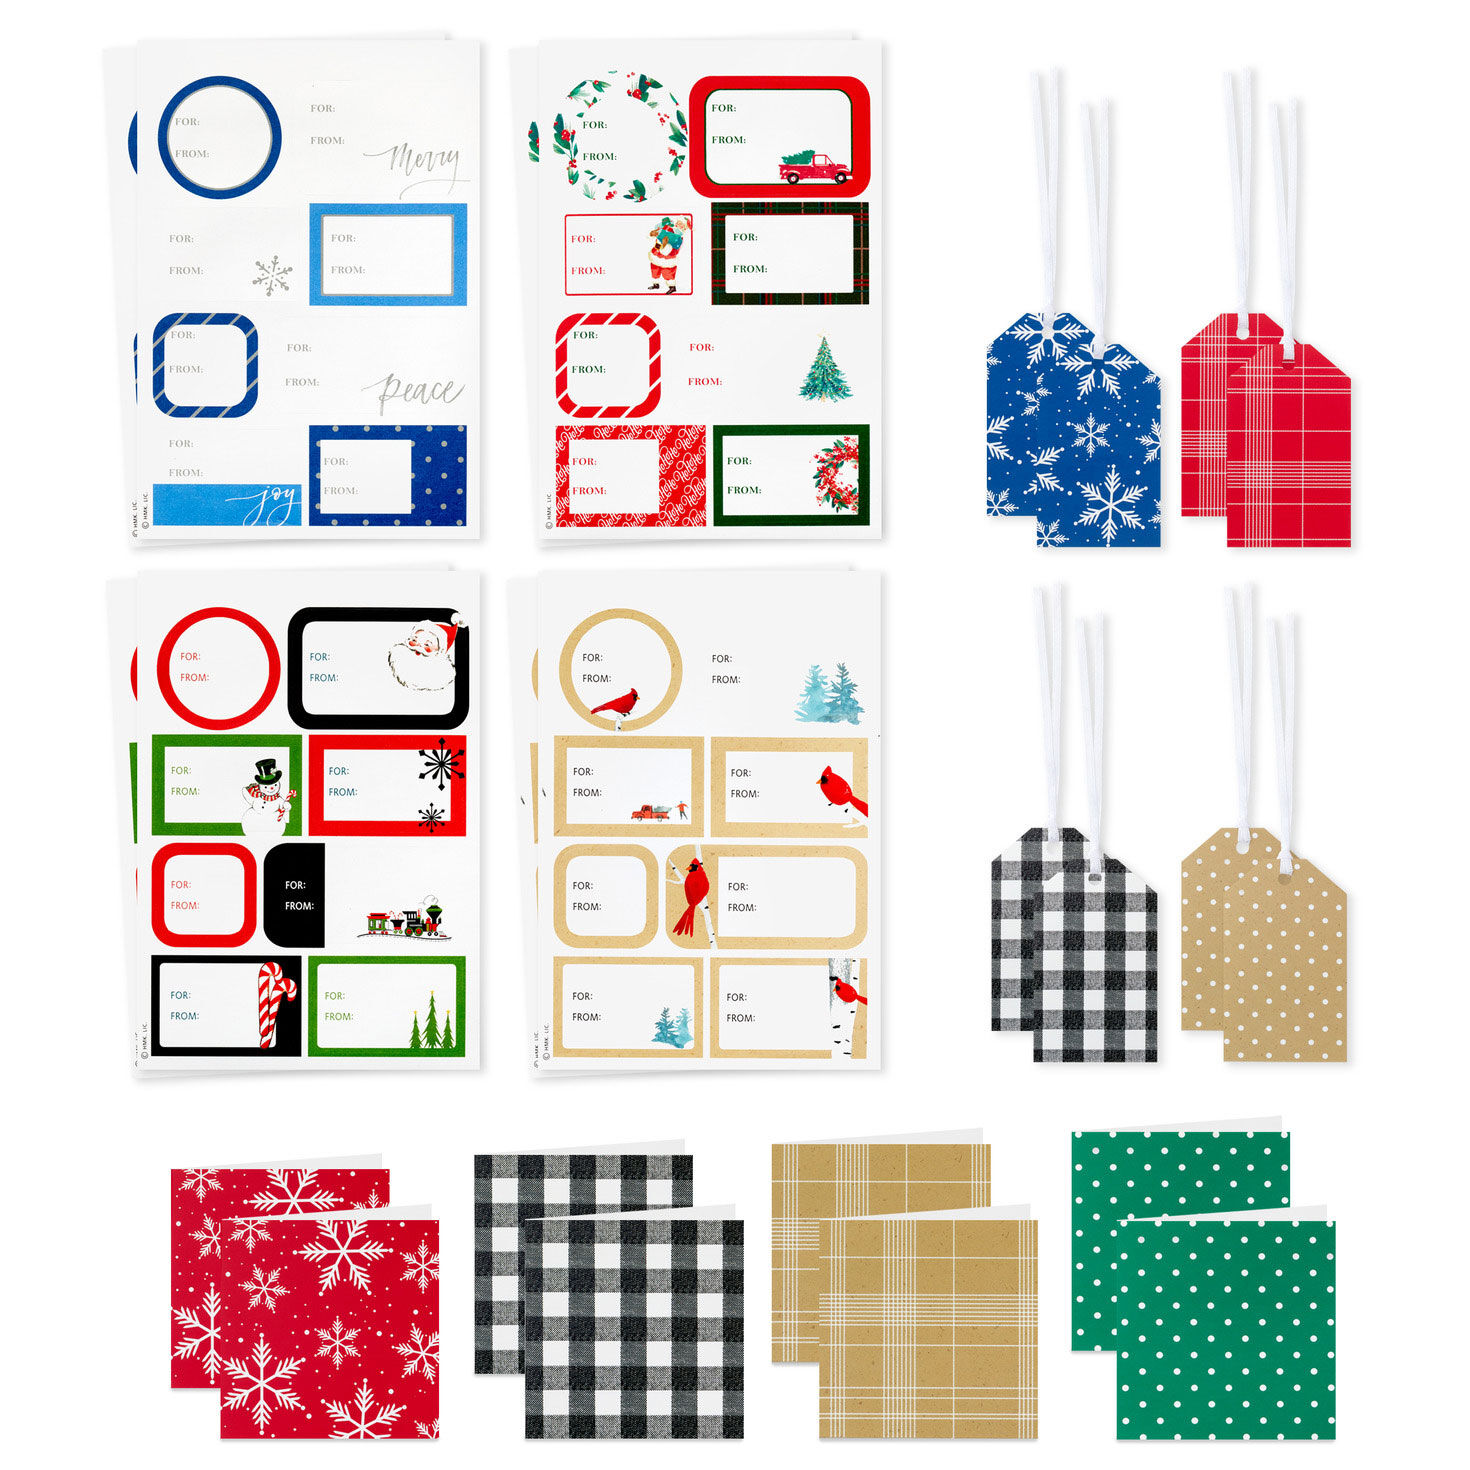 https://www.hallmark.com/dw/image/v2/AALB_PRD/on/demandware.static/-/Sites-hallmark-master/default/dwc6d48d18/images/finished-goods/products/5XSR1865/Classic-and-Elegant-Christmas-Gift-Tag-Kit_5XSR1865_01.jpg?sfrm=jpg